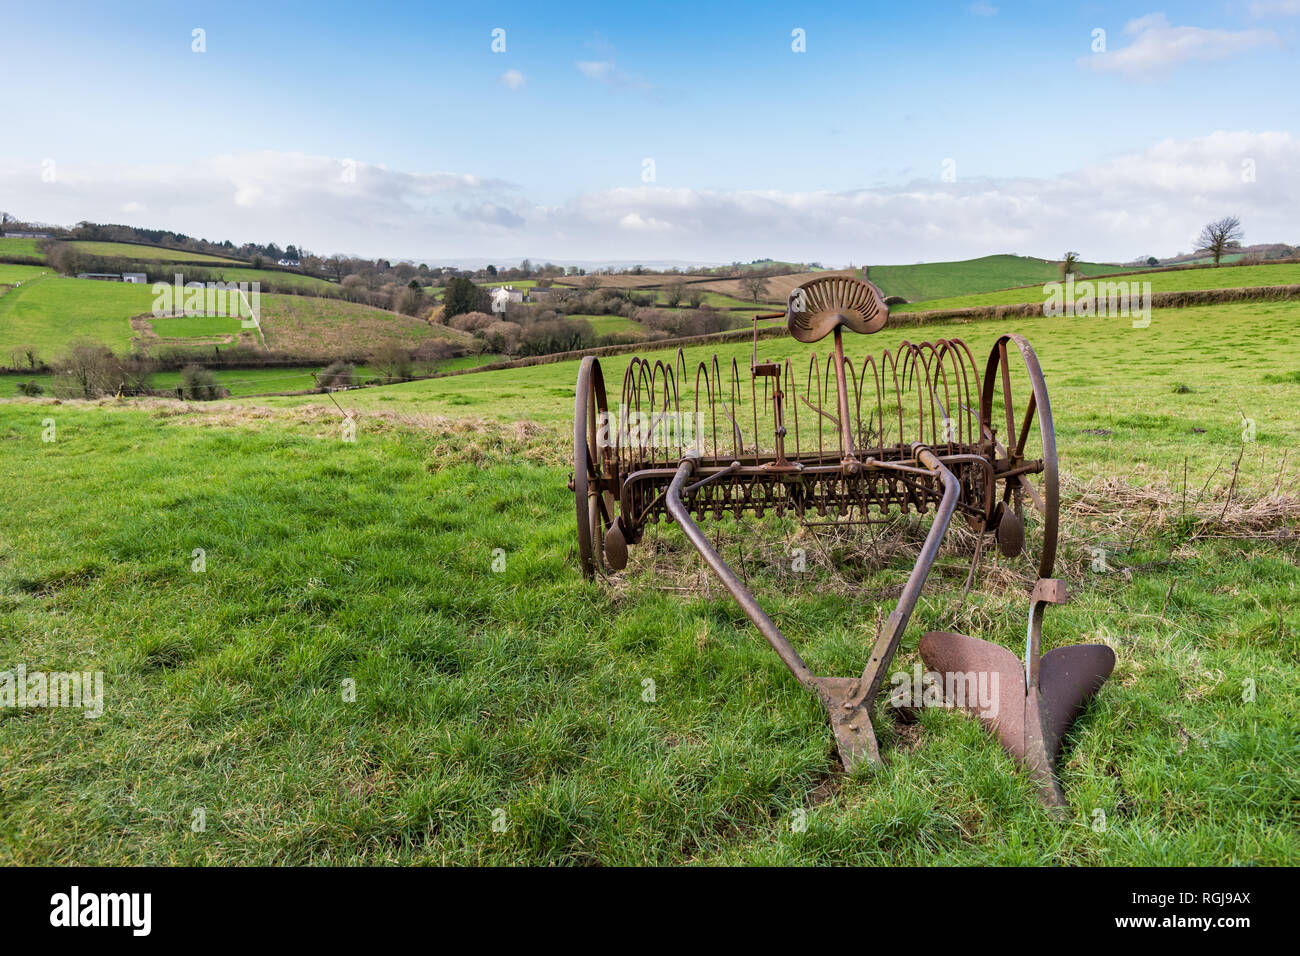 Old rusty horse drawn hay rake in a grass field with Devonshire countryside and hills in the background under a blue and cloudy sky on a bright day Stock Photo